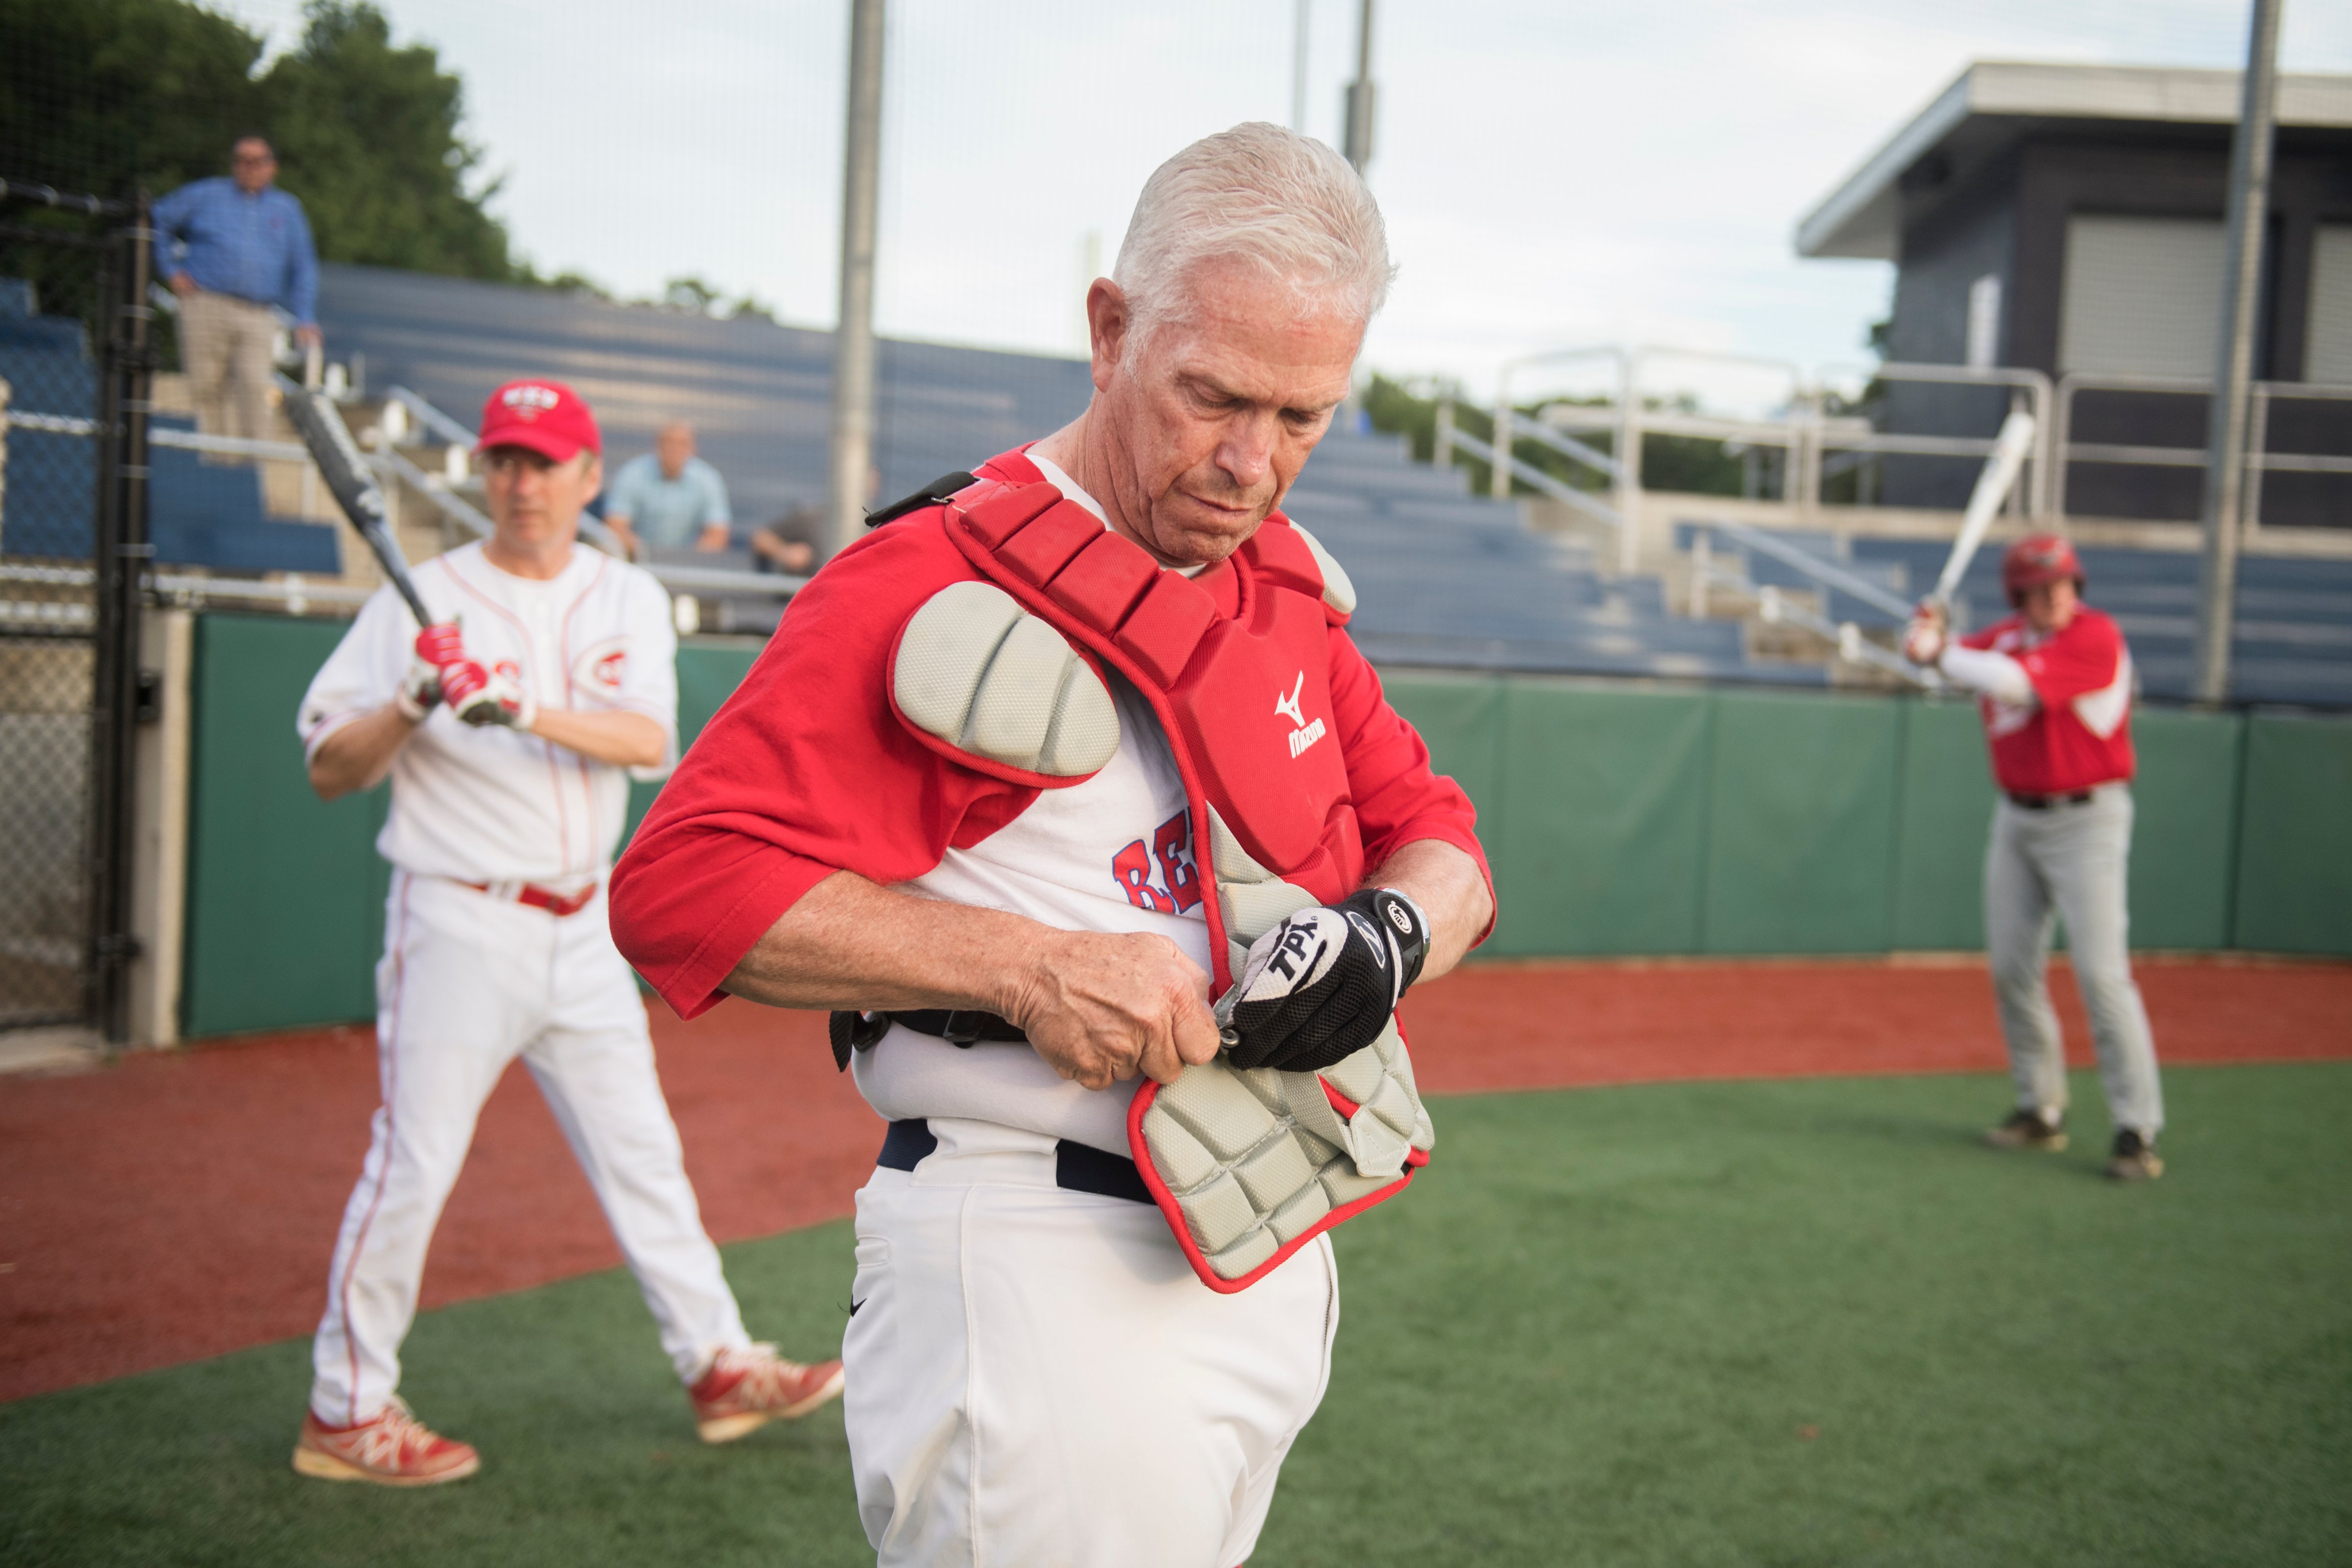 UNITED STATES - JUNE 13: Rep. Bill Johnson, R-Ohio, puts on catcher's gear during a scrimmage between Republican team members at the Washington Nationals Youth Baseball Academy in Anacostia, June 13, 2016. (Tom Williams—CQ-Roll Call,Inc.)